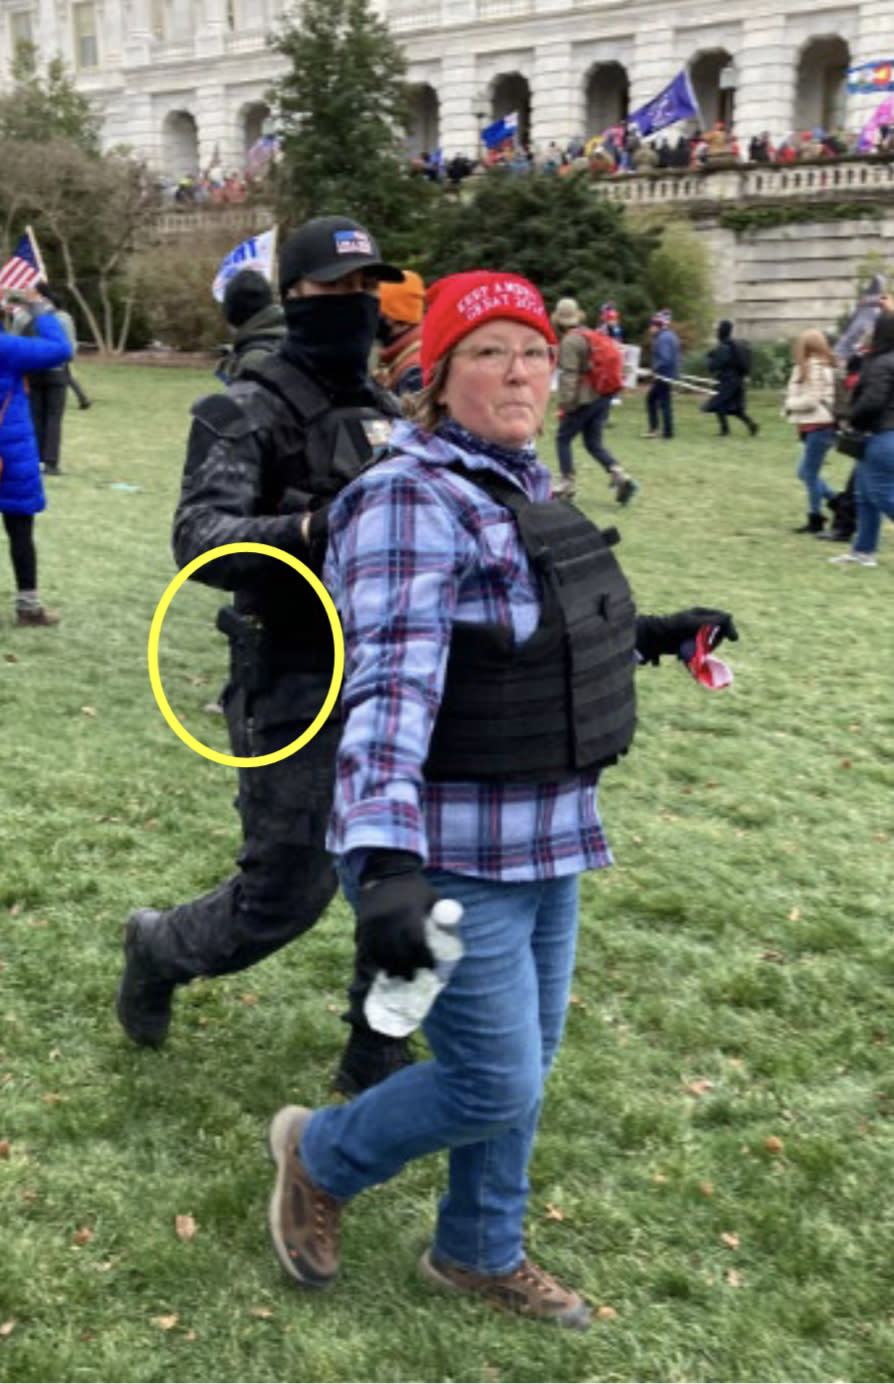 Image 2: photo showing Munchel and Eisenhart wearing tactical vests on the grounds of the U.S. Capitol, with Munchel’s Taser circled in yellow (Exhibit 401)